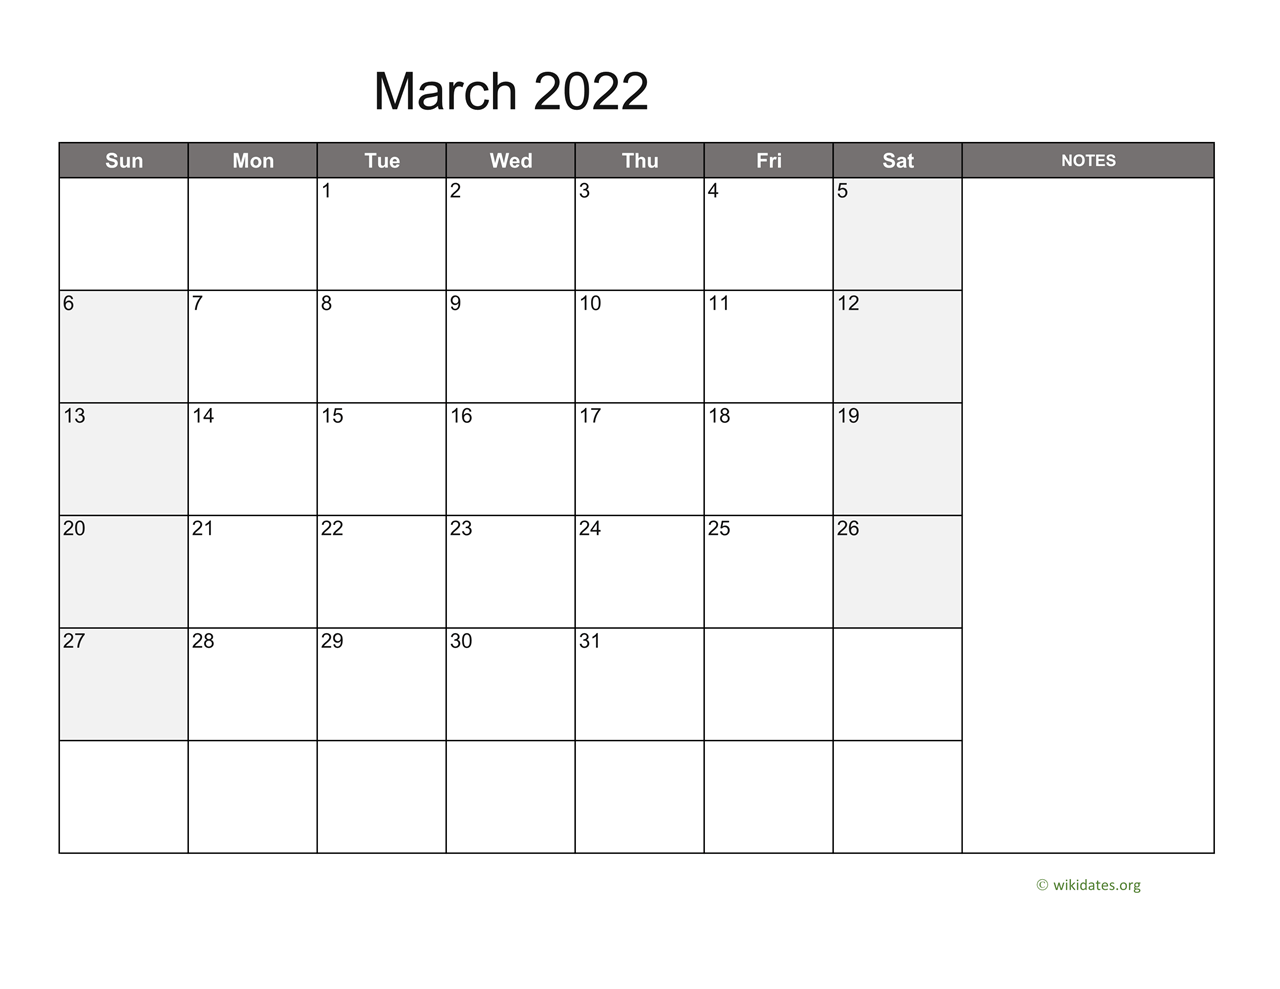 march-2022-calendar-with-notes-wikidates